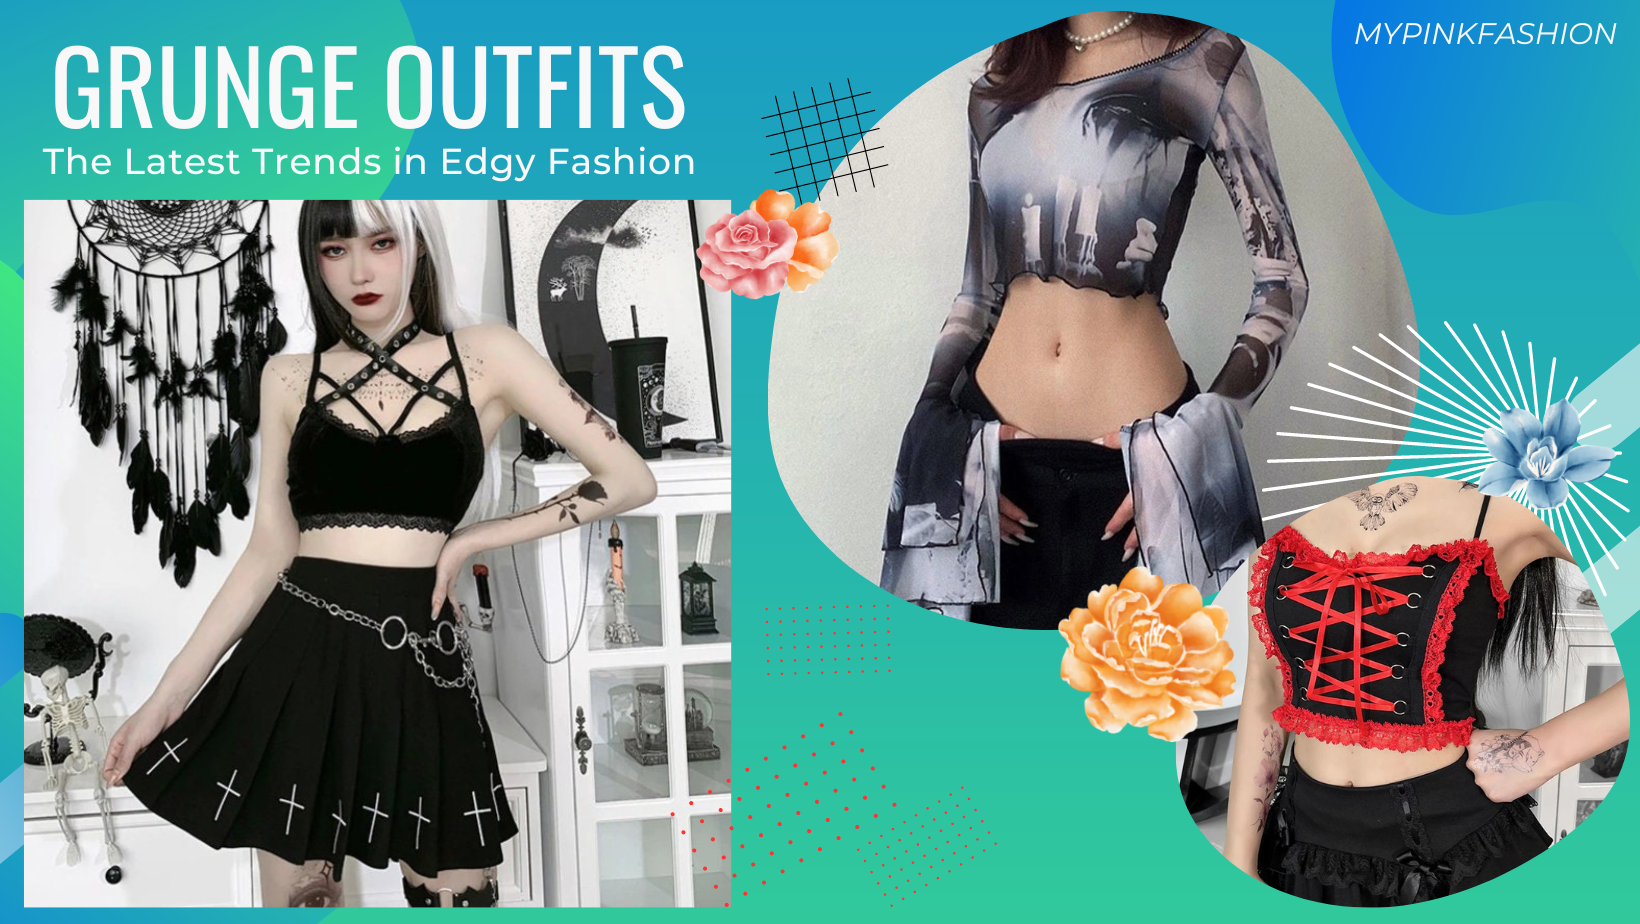 Grunge Outfits: The Latest Trends in Edgy Fashion